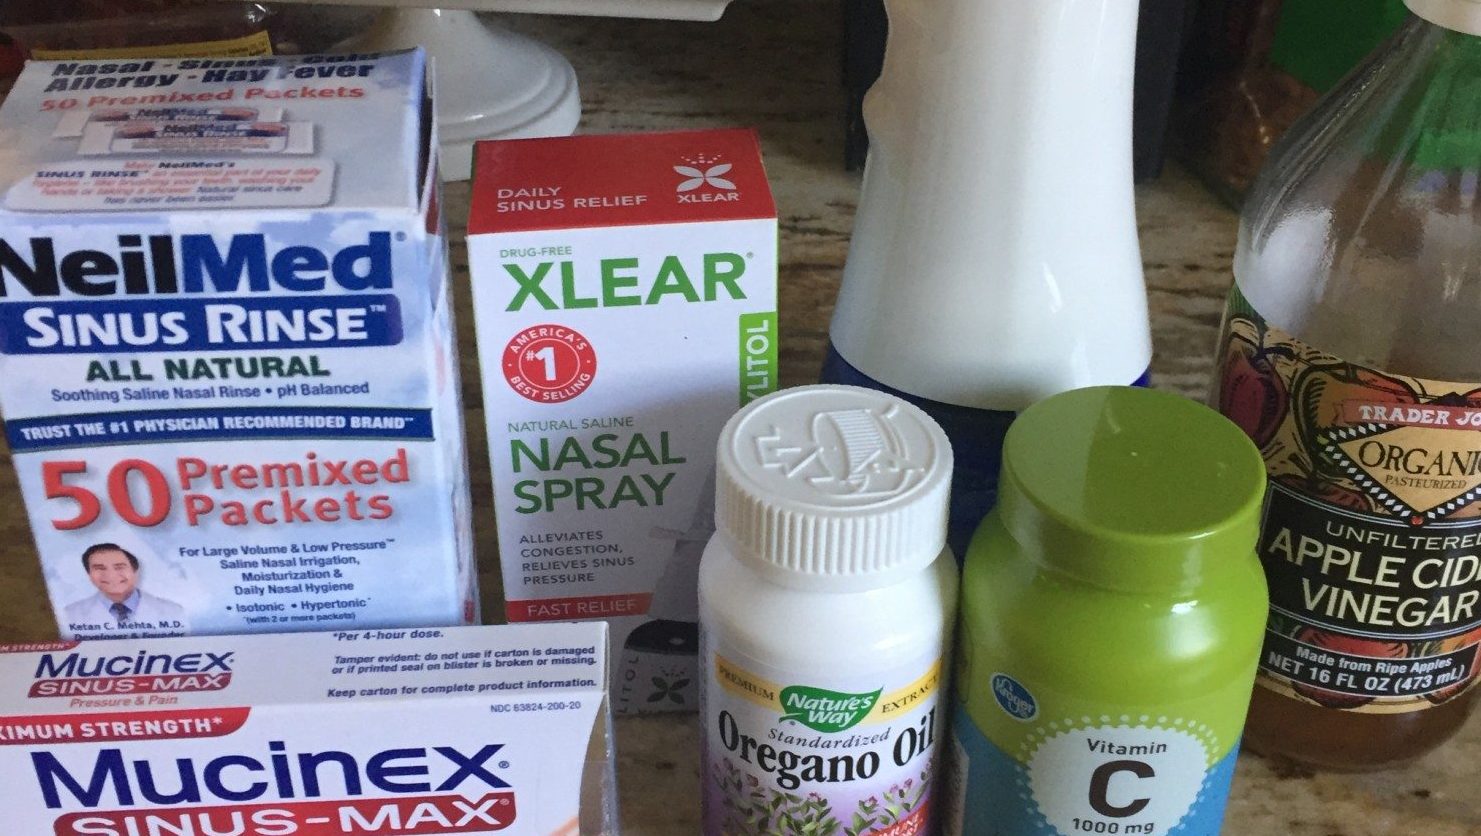 The Best Medications for Sinusitis